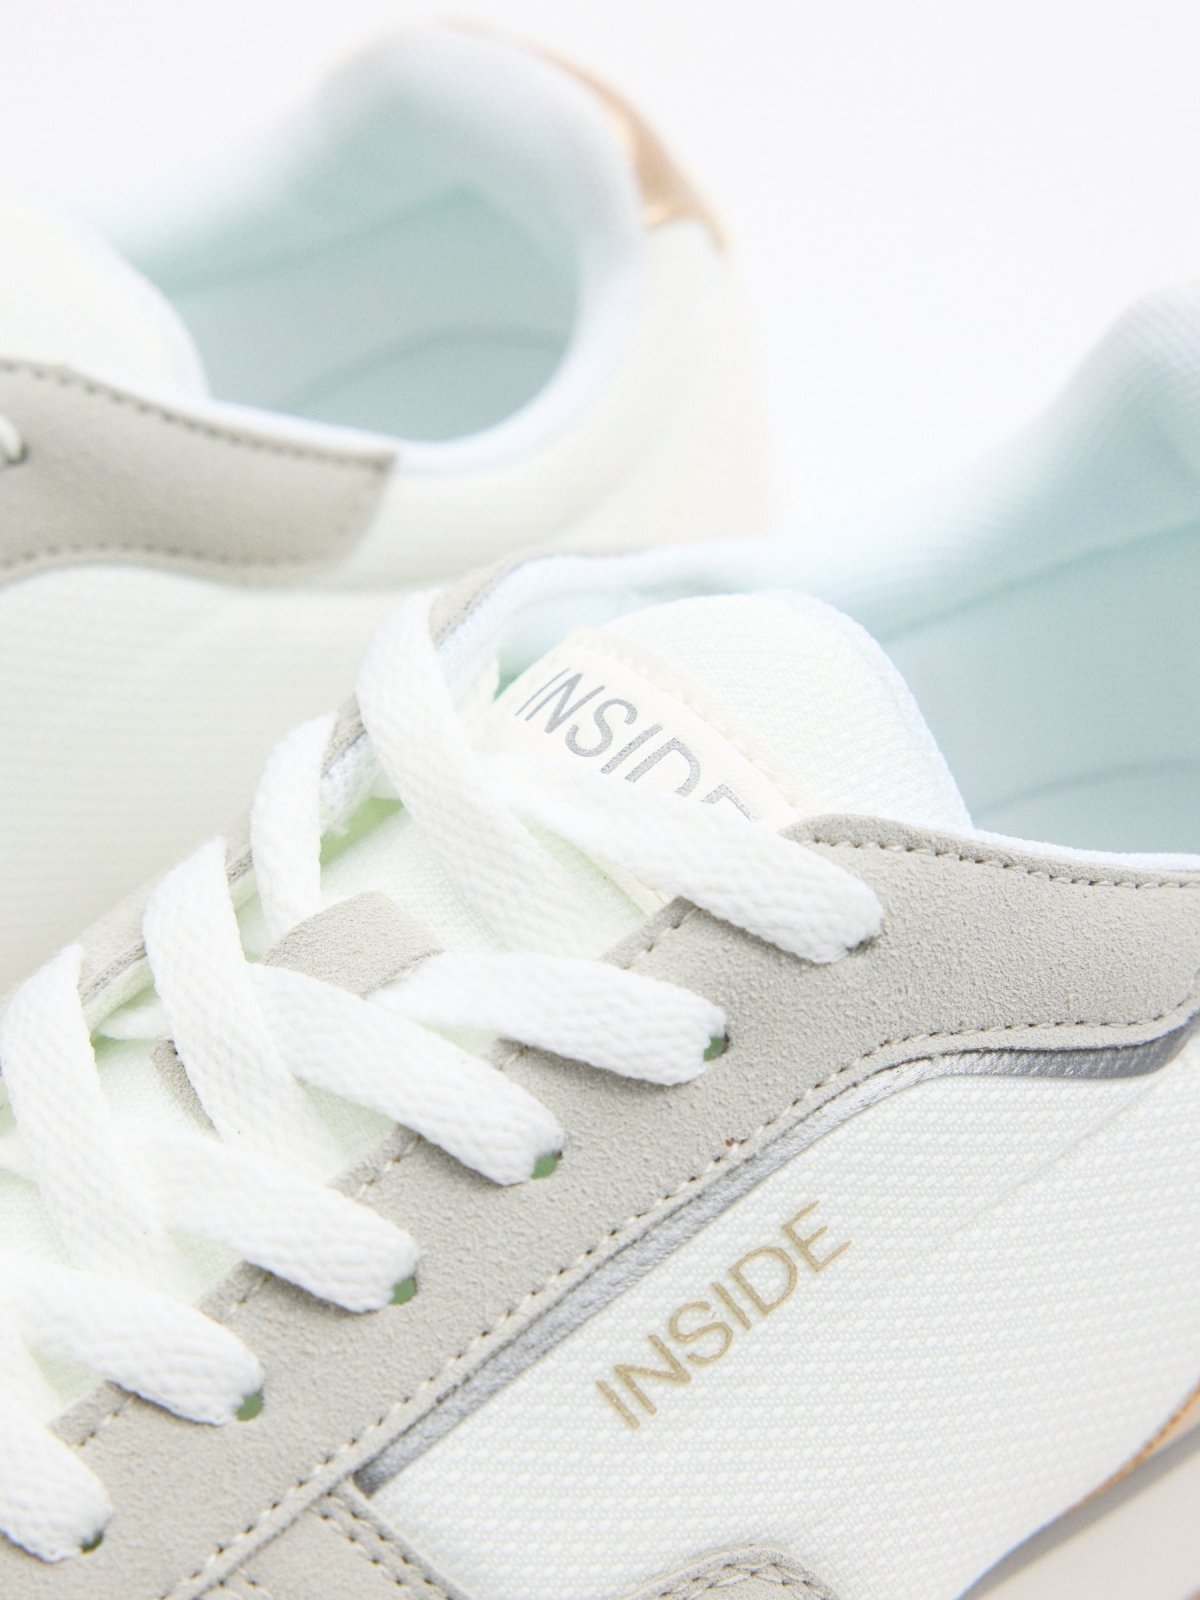 Nylon casual running sneaker off white detail view